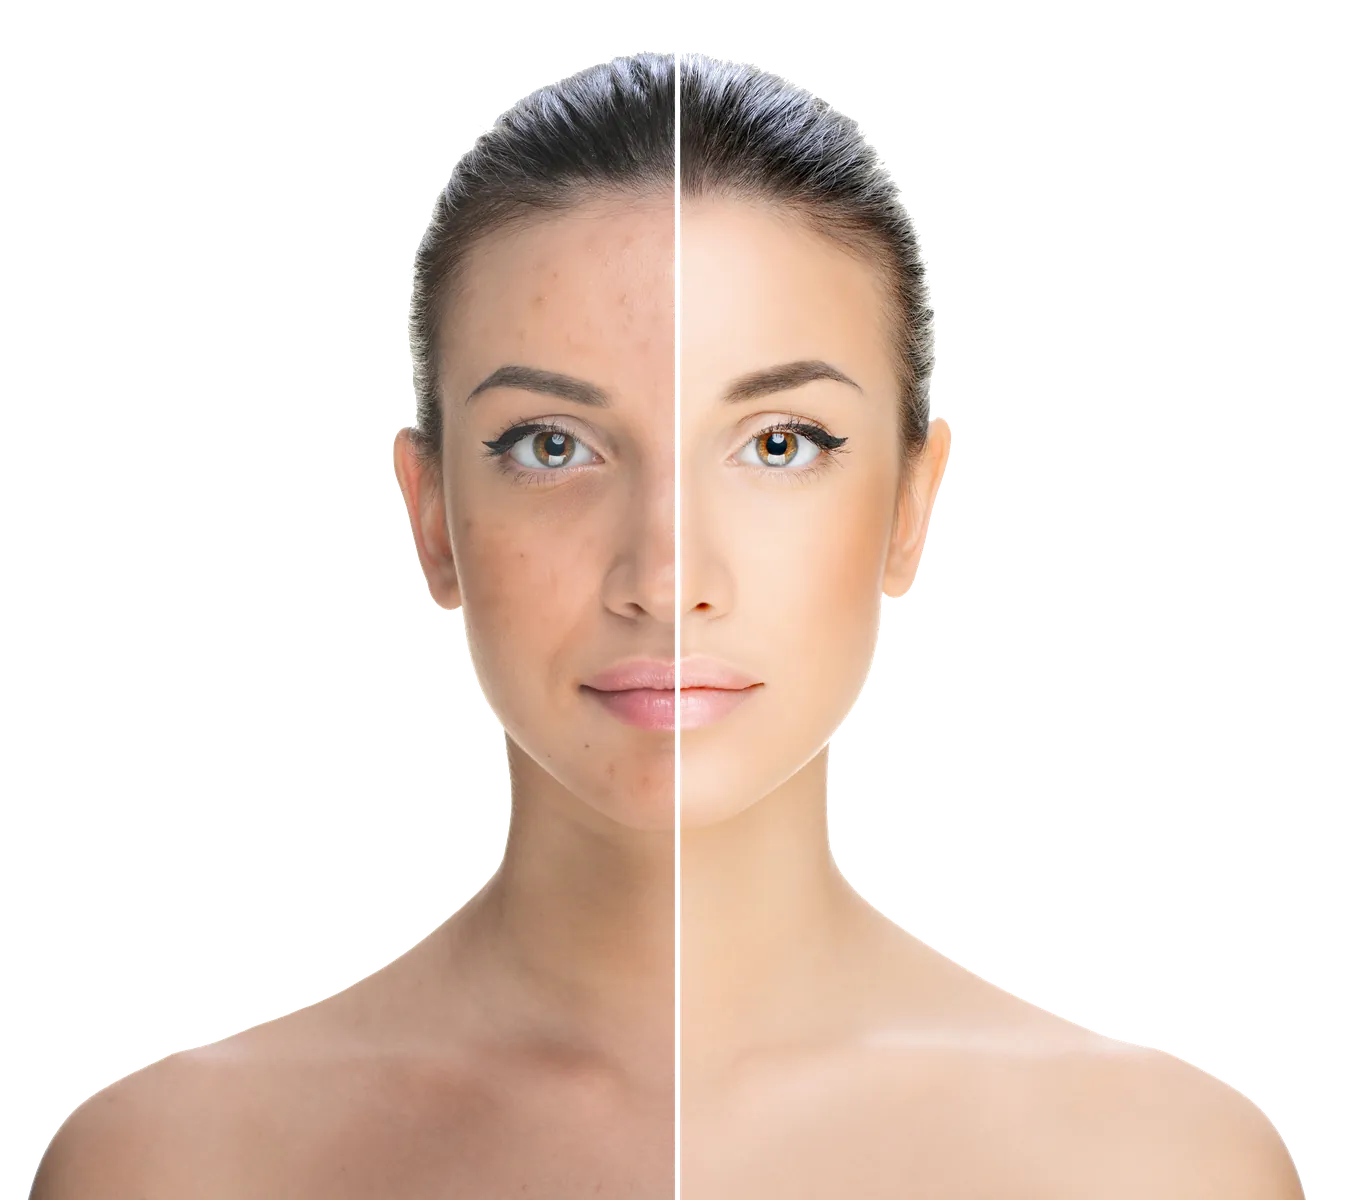 The half left side of a woman has pigment on her skin, while, the other half right side of a woman has a clear skin.